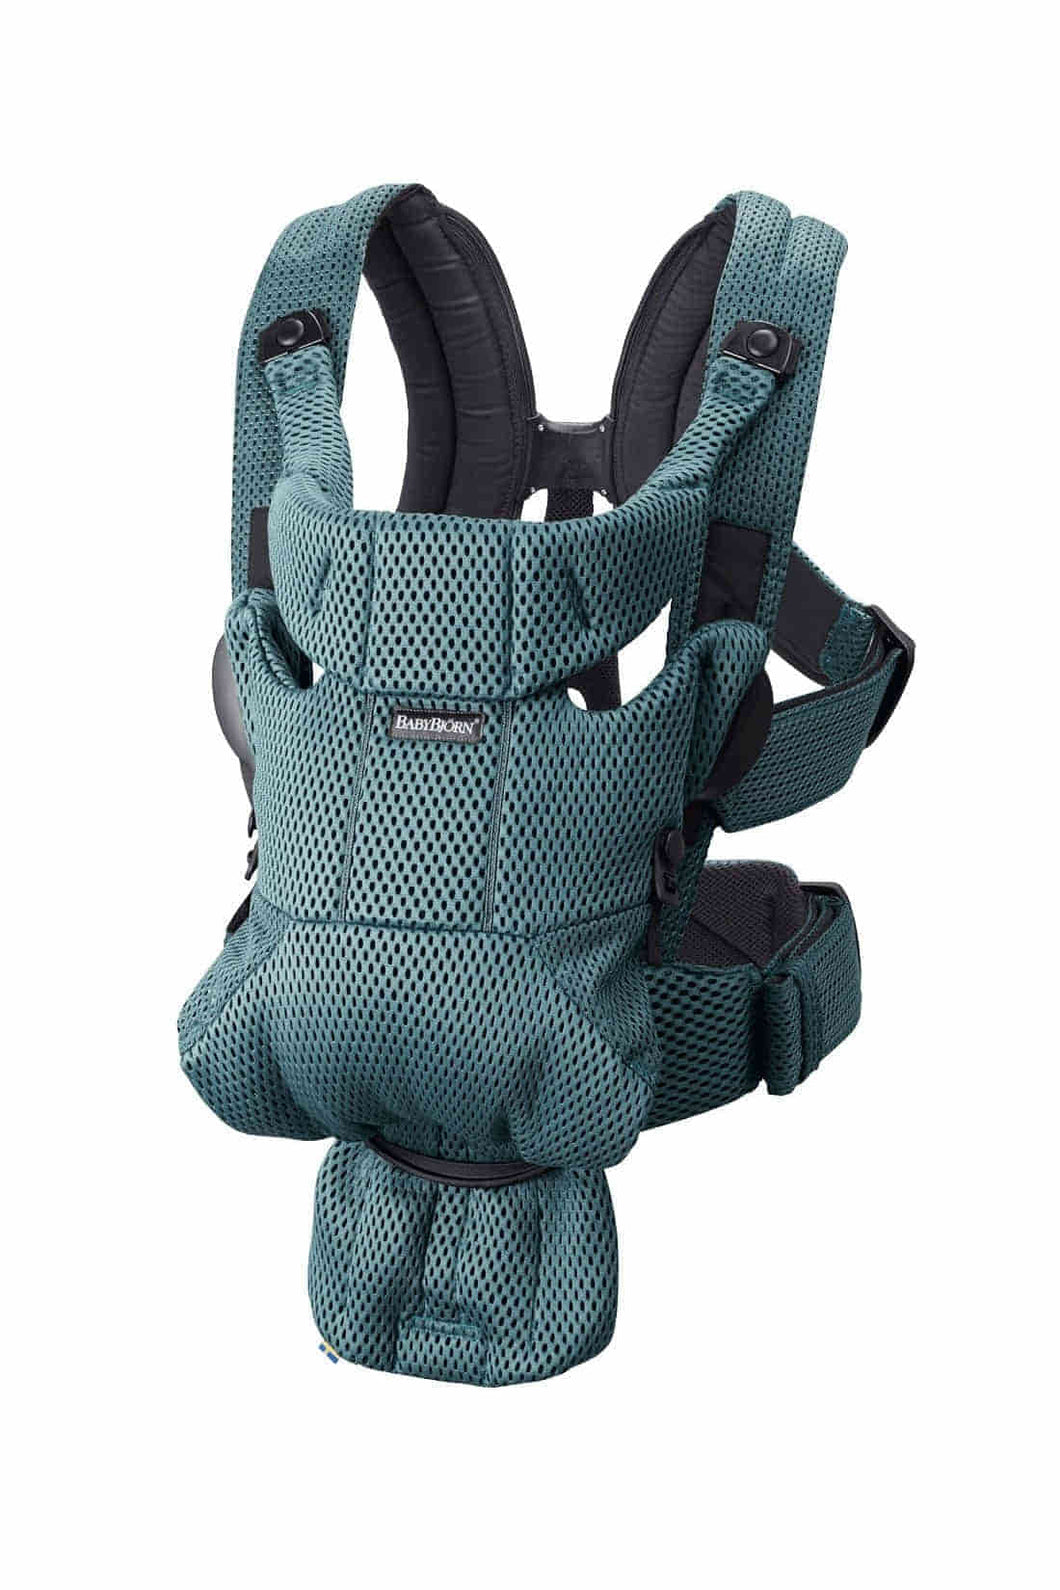 Babybjorn Baby Carrier Move Sage Green 3D Mesh 1